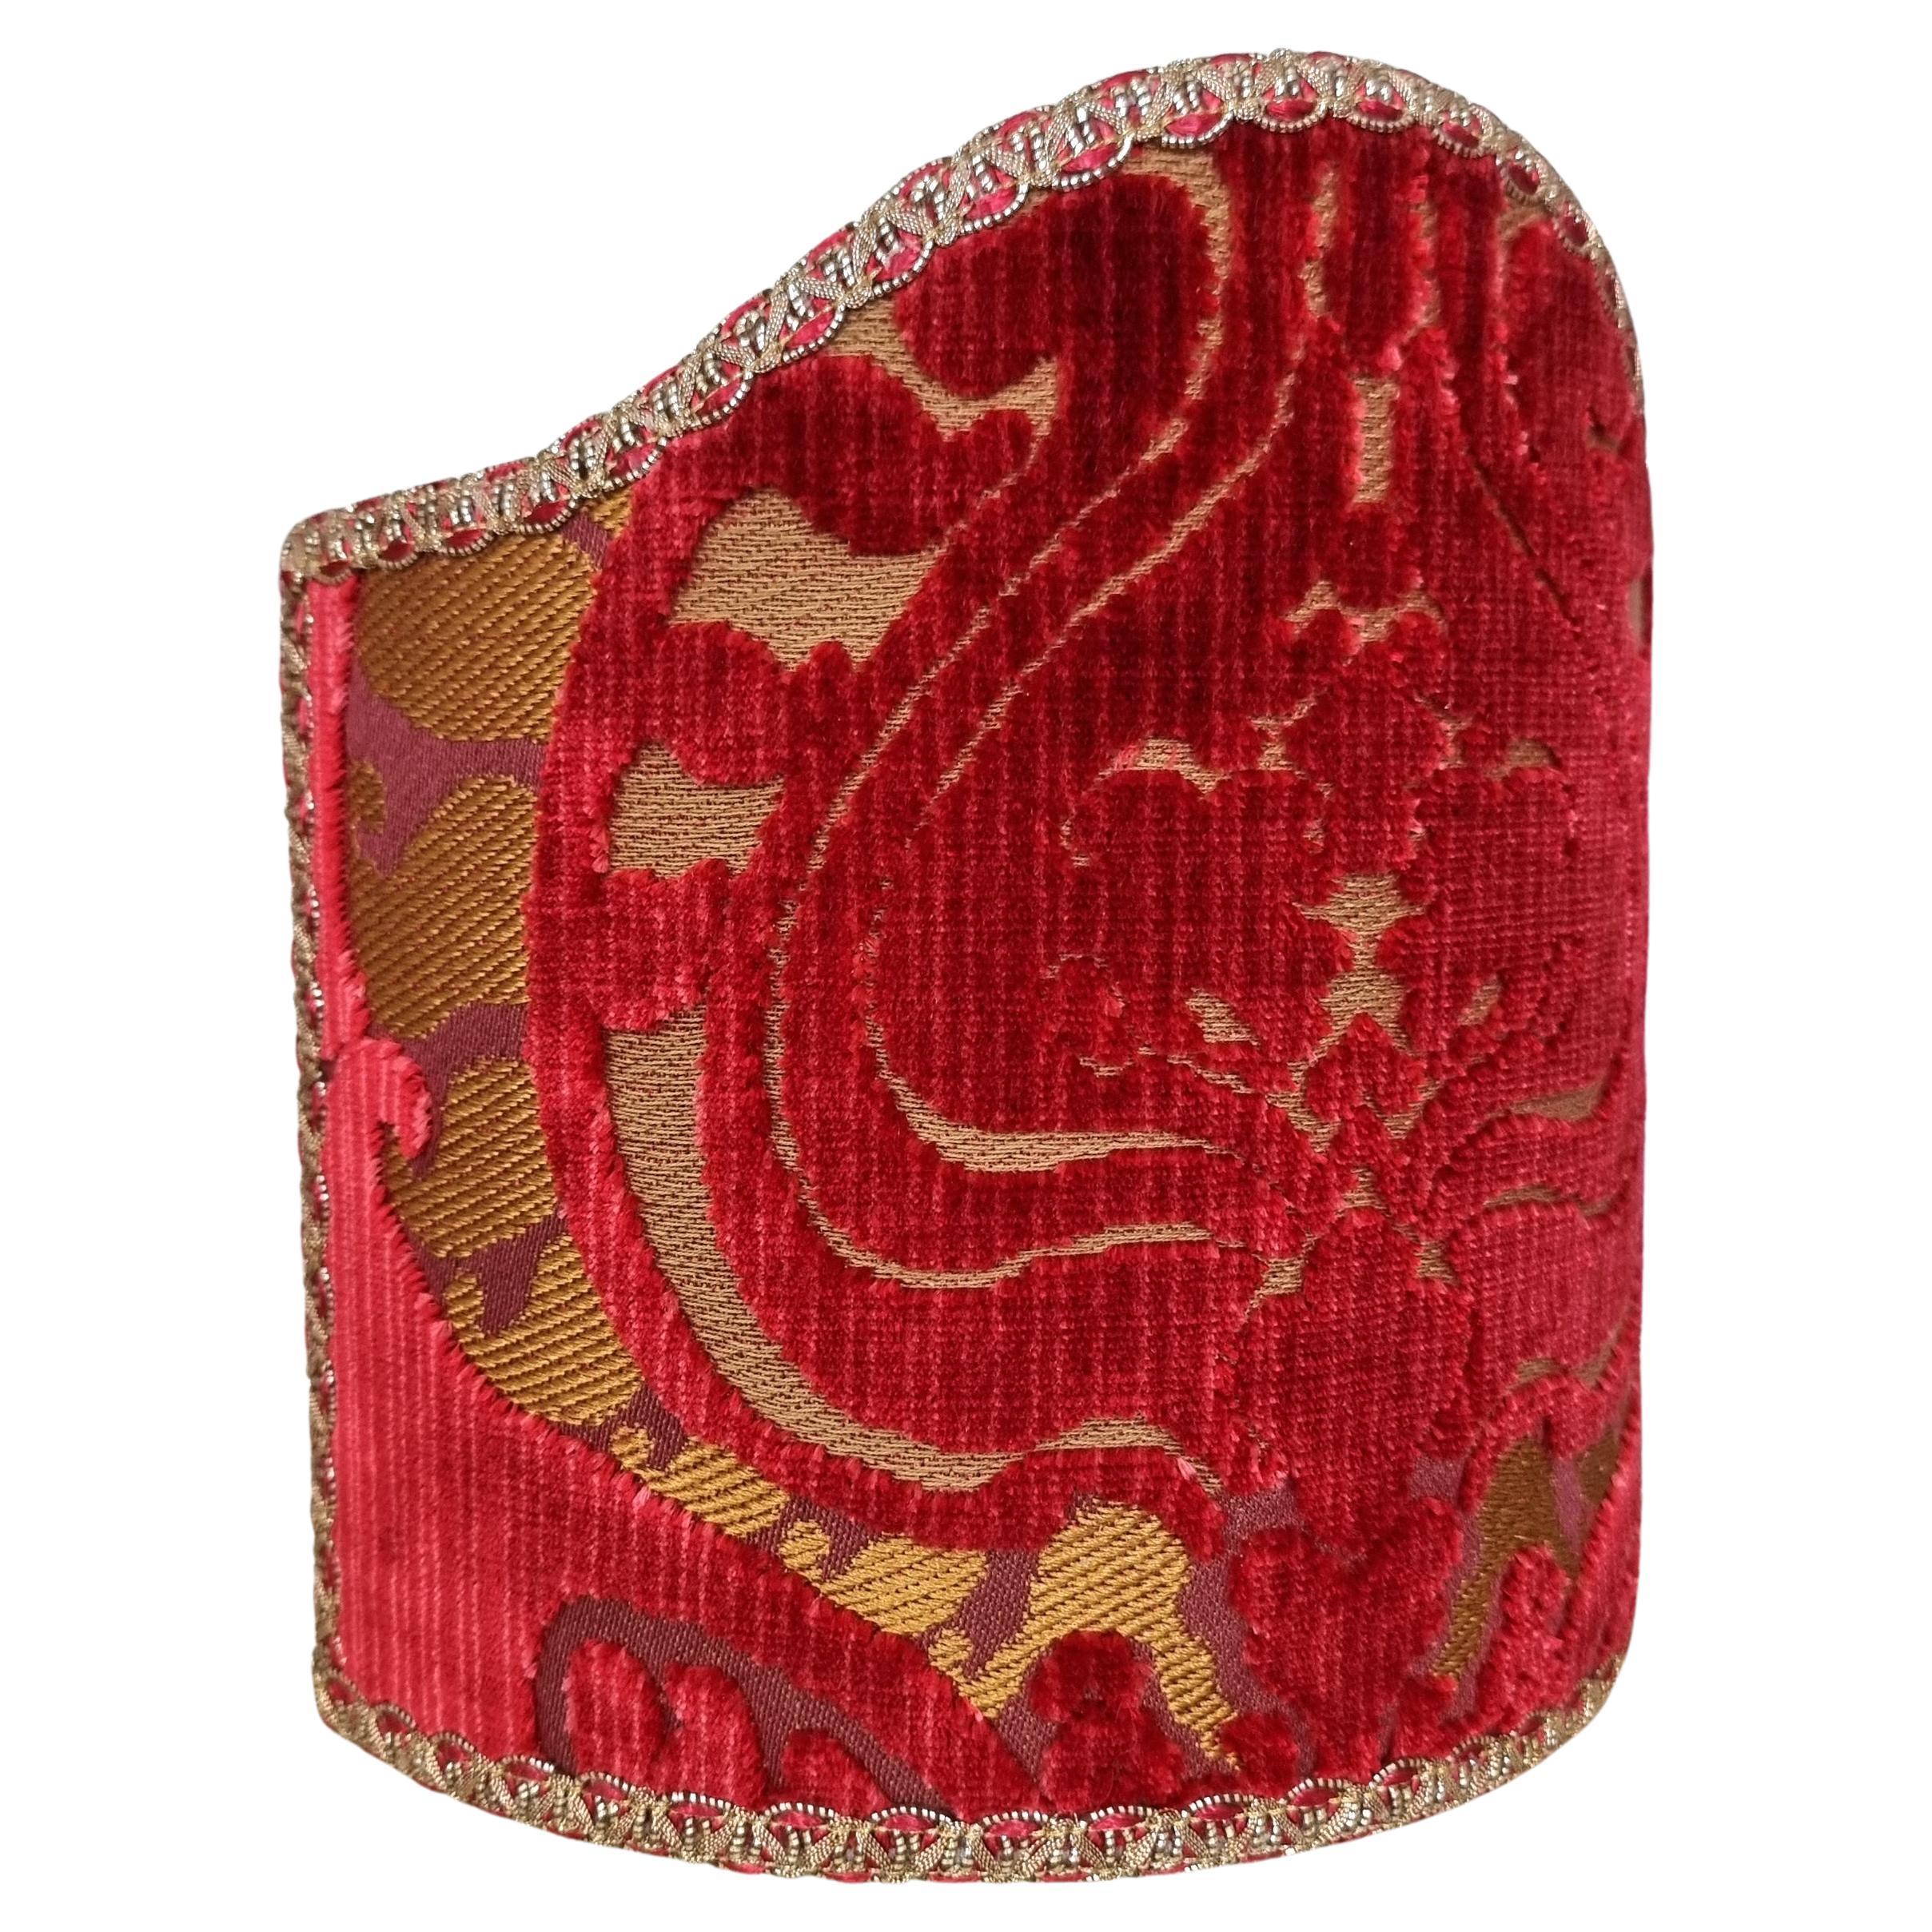 This clip-on lampshade with a fitting that clips over the light bulb is handmade using Luigi Bevilacqua heddle velvet - Torcello pattern - in red color, finished with red and gold trim. Suitable for candelabra bulbs only.
The refined pattern of